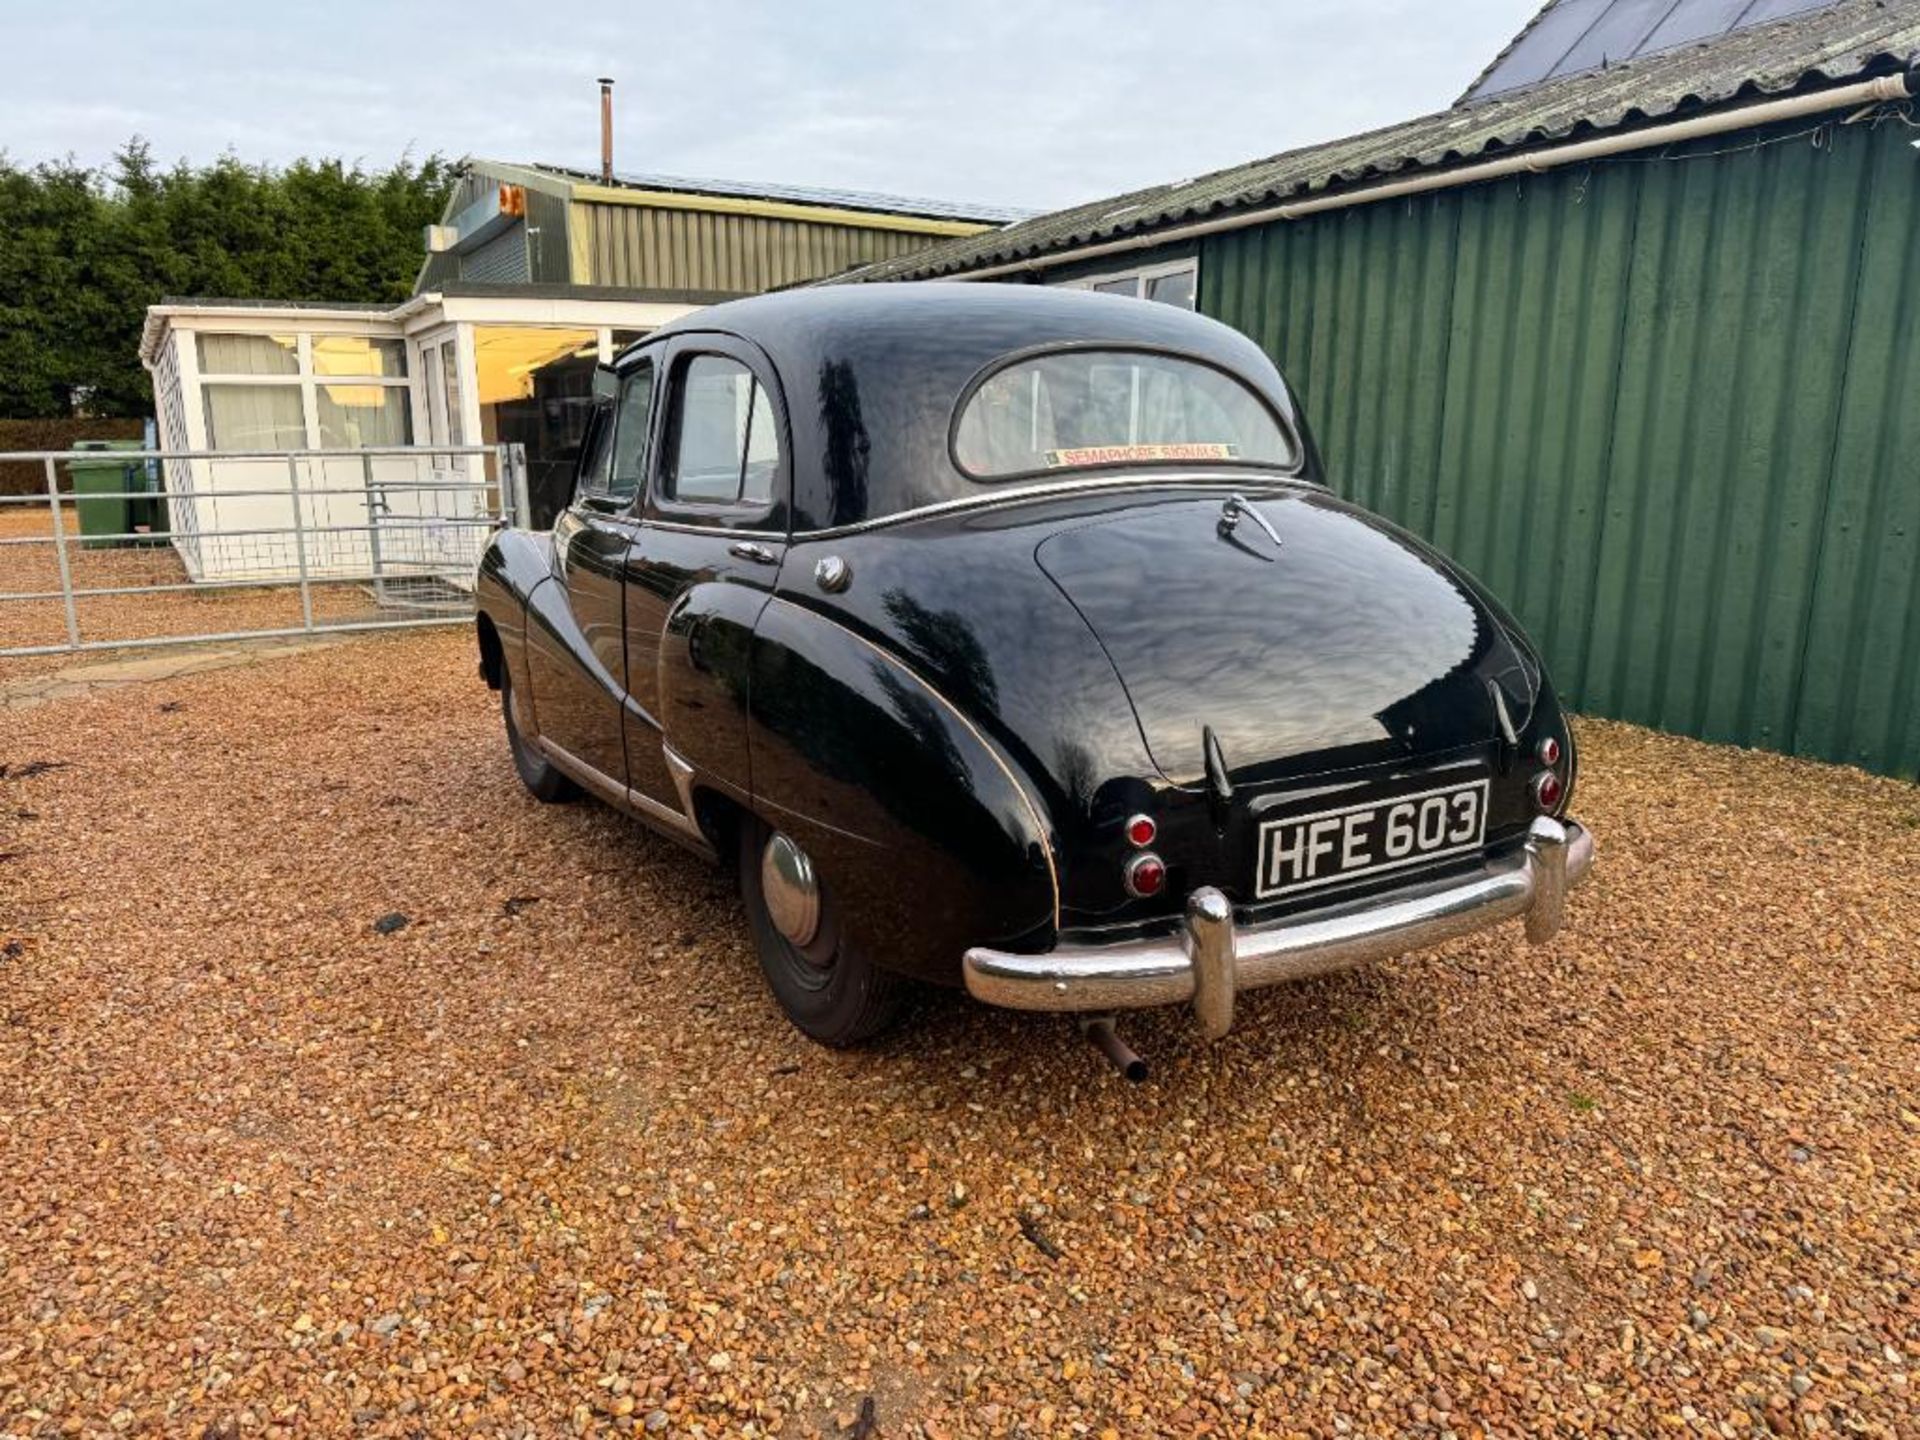 1954 Austin A40 Somerset black saloon car with 1200cc petrol engine, red leather interior and spare - Image 6 of 24